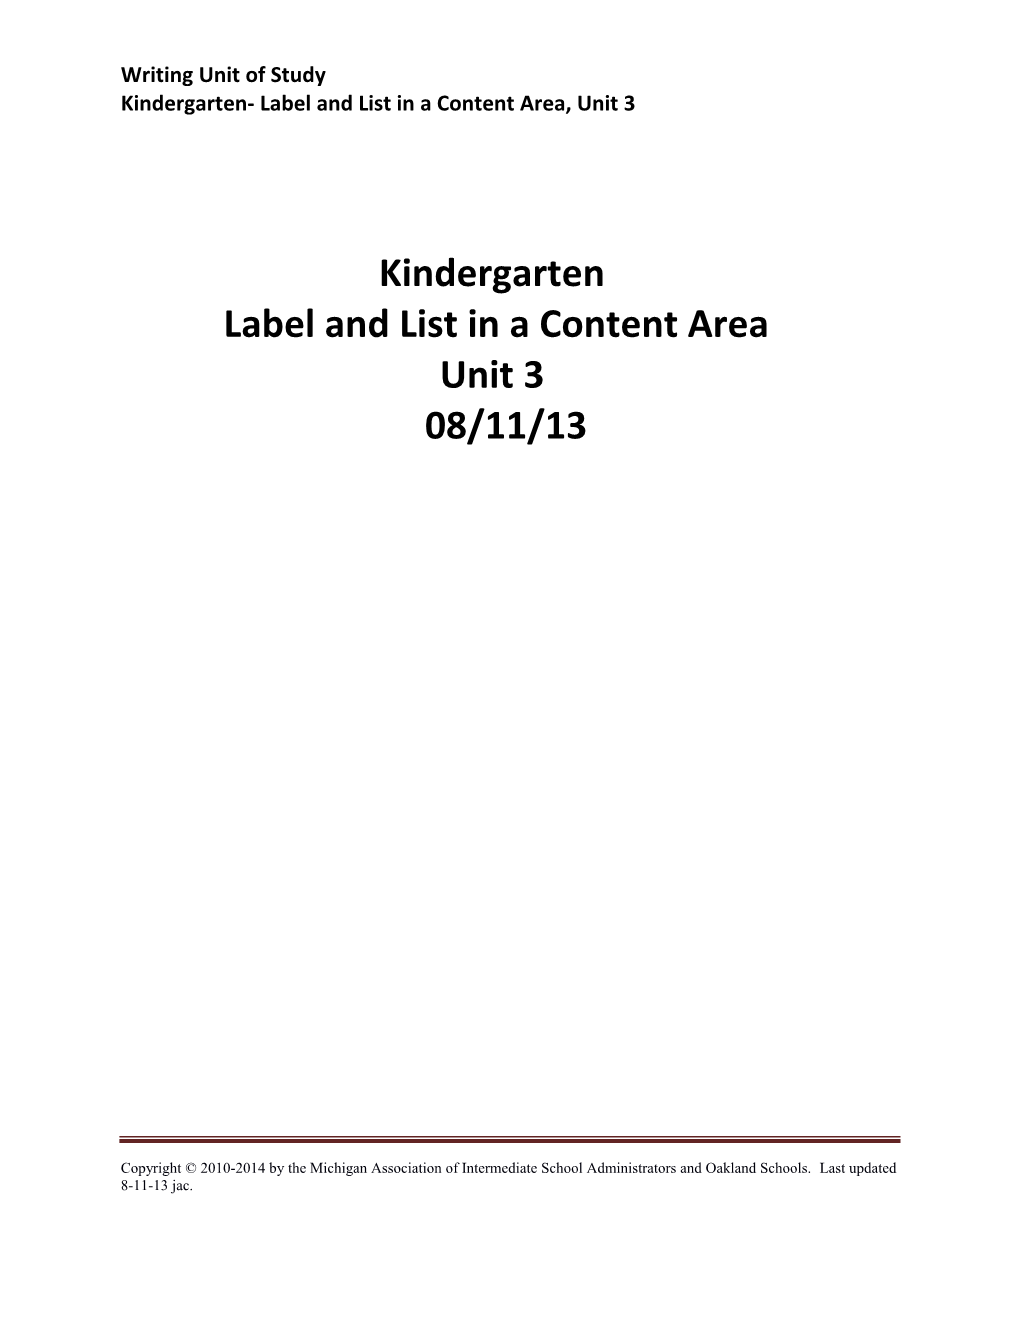 Kindergarten- Label and List in a Content Area, Unit 3